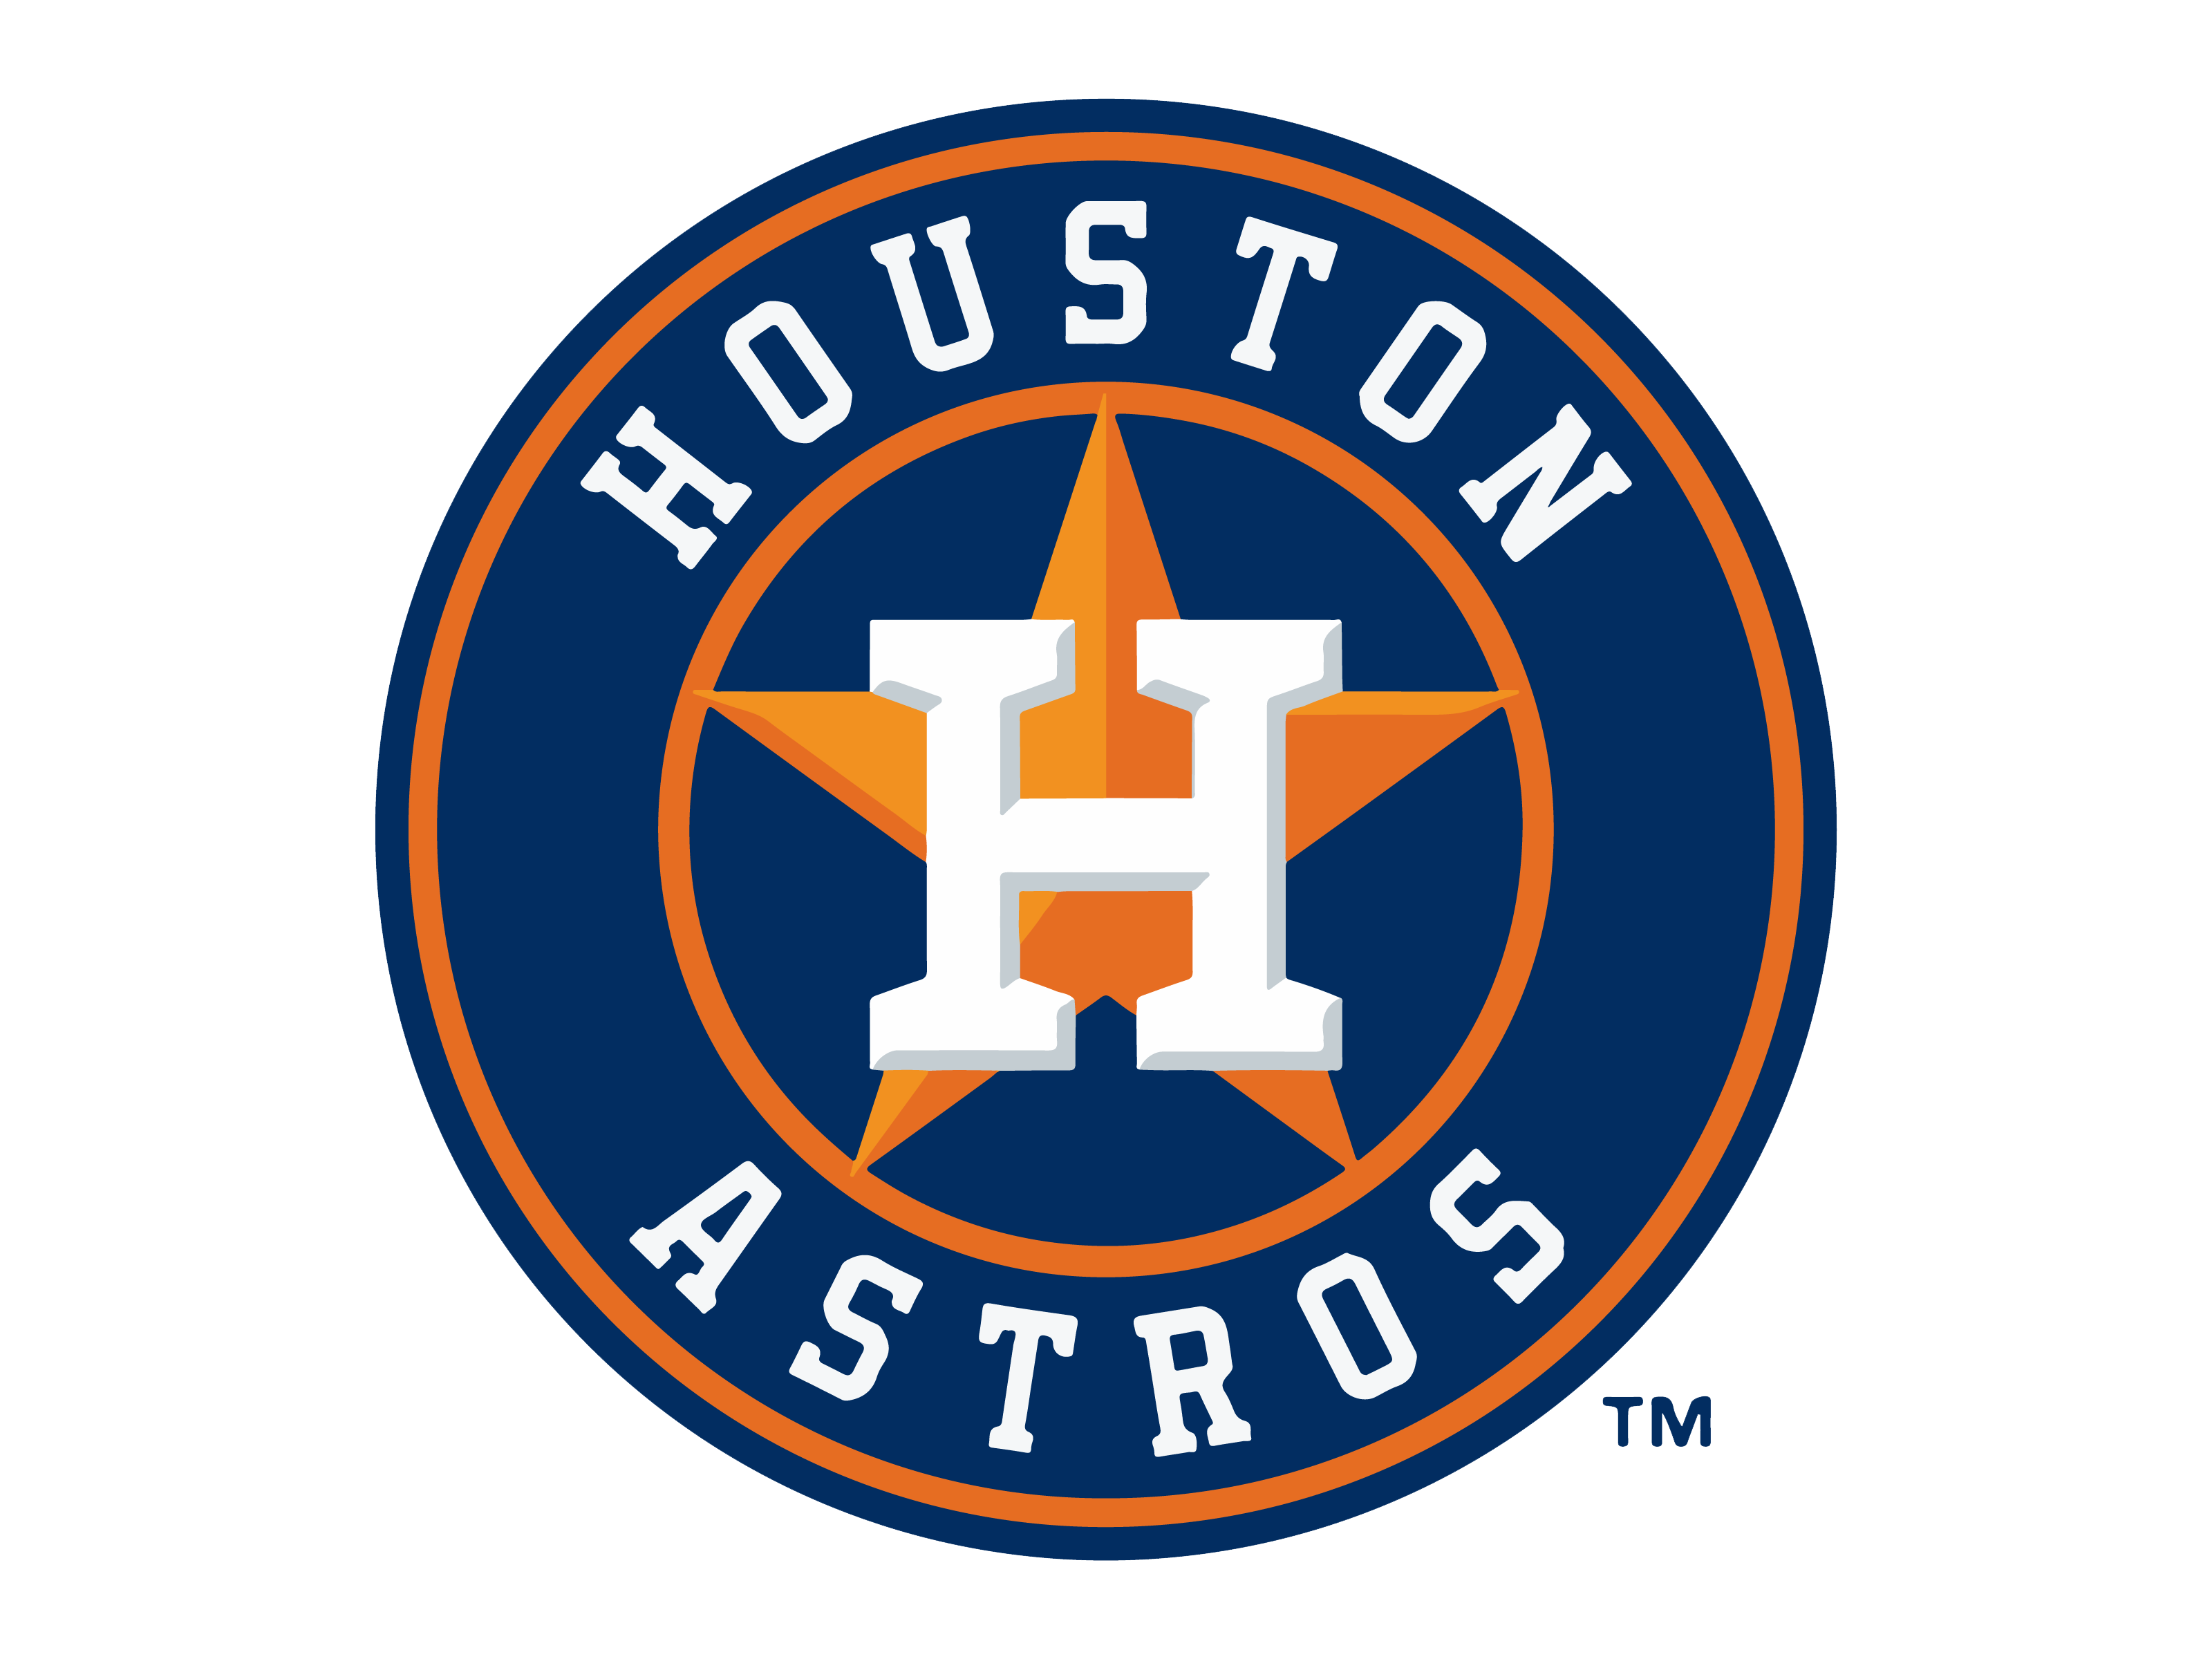 How to Watch Off-Season Houston Astros Teams and Games Without Cable